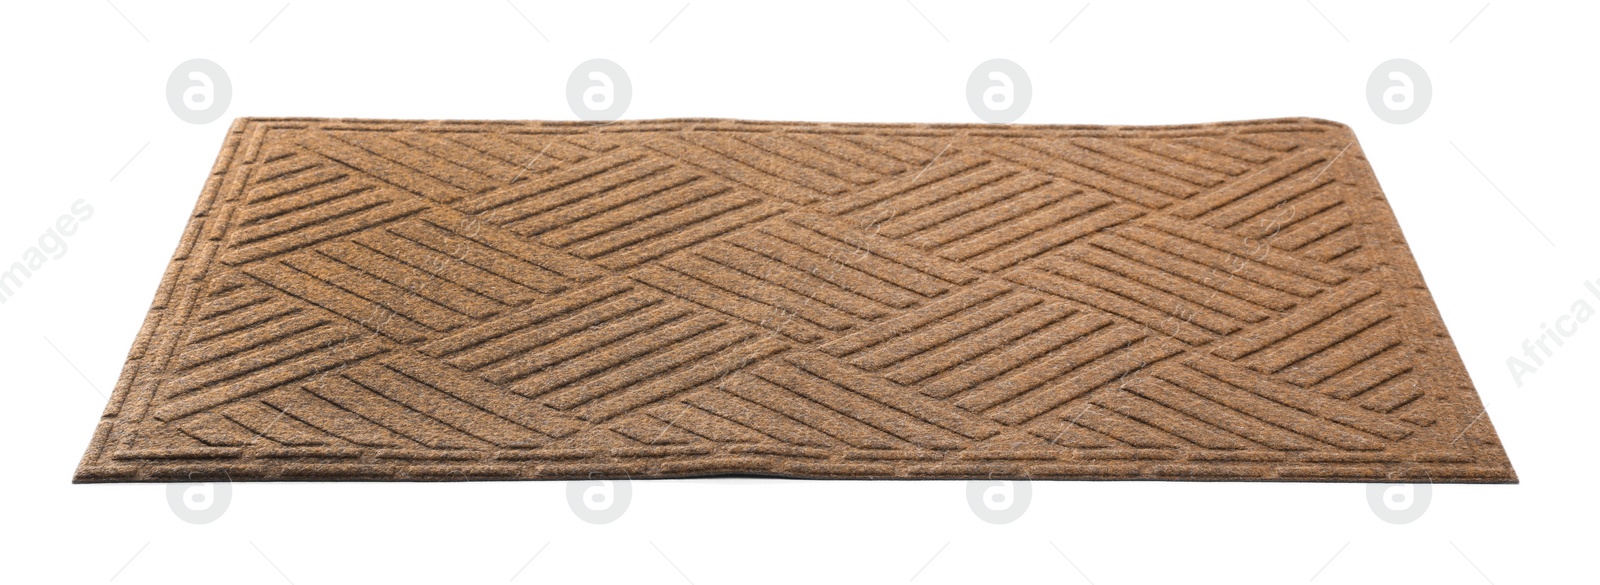 Photo of New clean door mat isolated on white